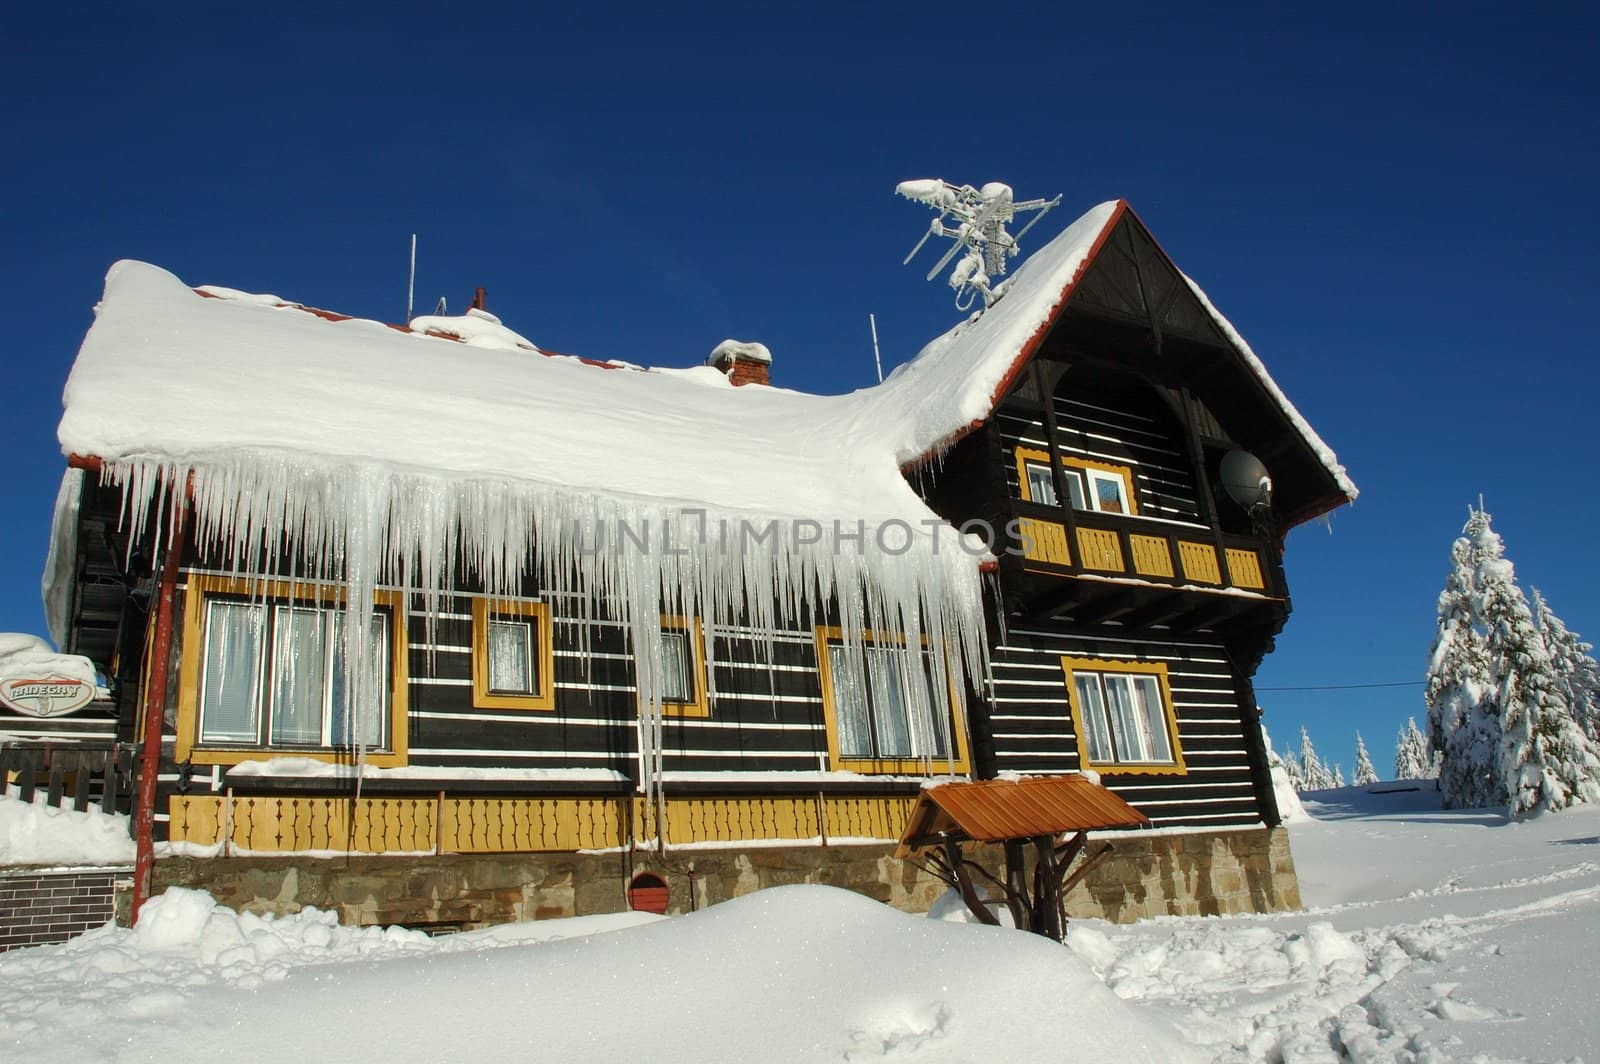 czech snowy tourist cottage with icicle and blue sky